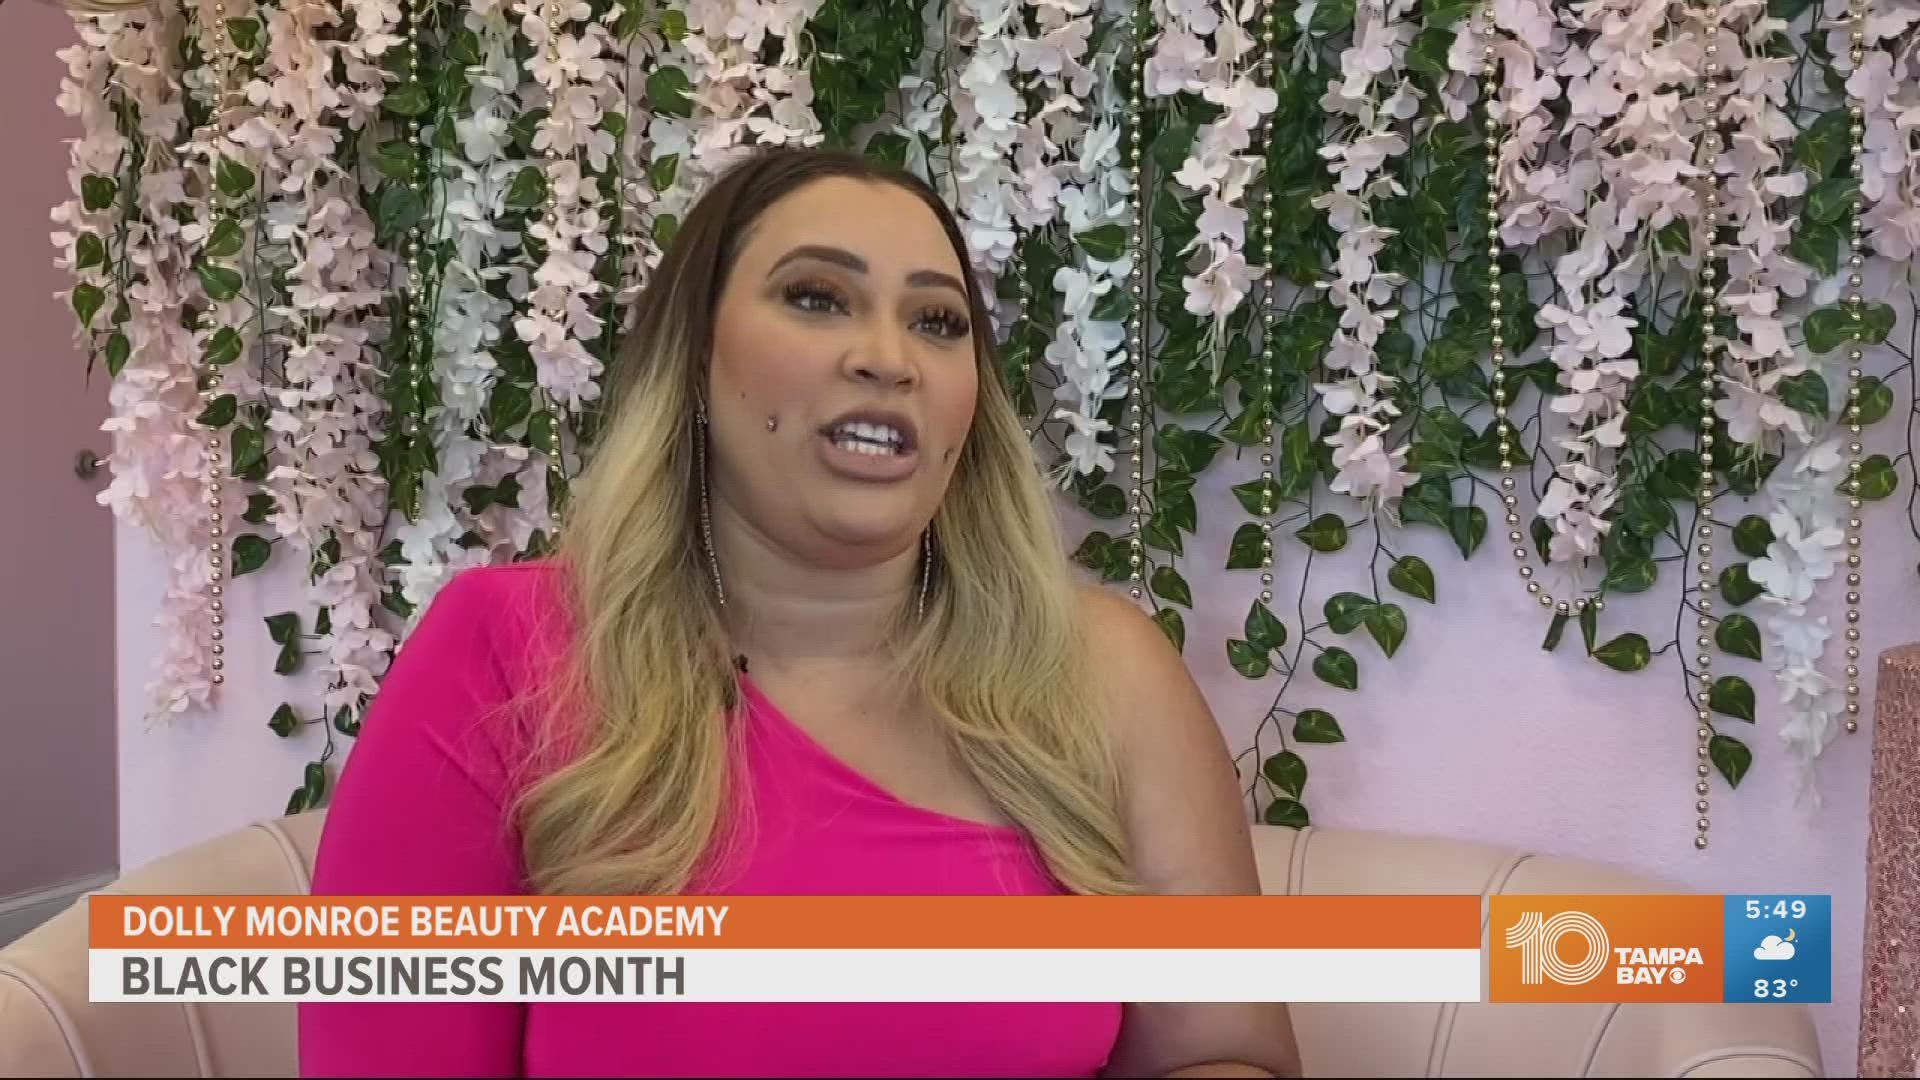 When we spoke with Dolly Monroe last year, she had a five-year plan to expand her beauty academy across Florida. But one year later, it's already happening!